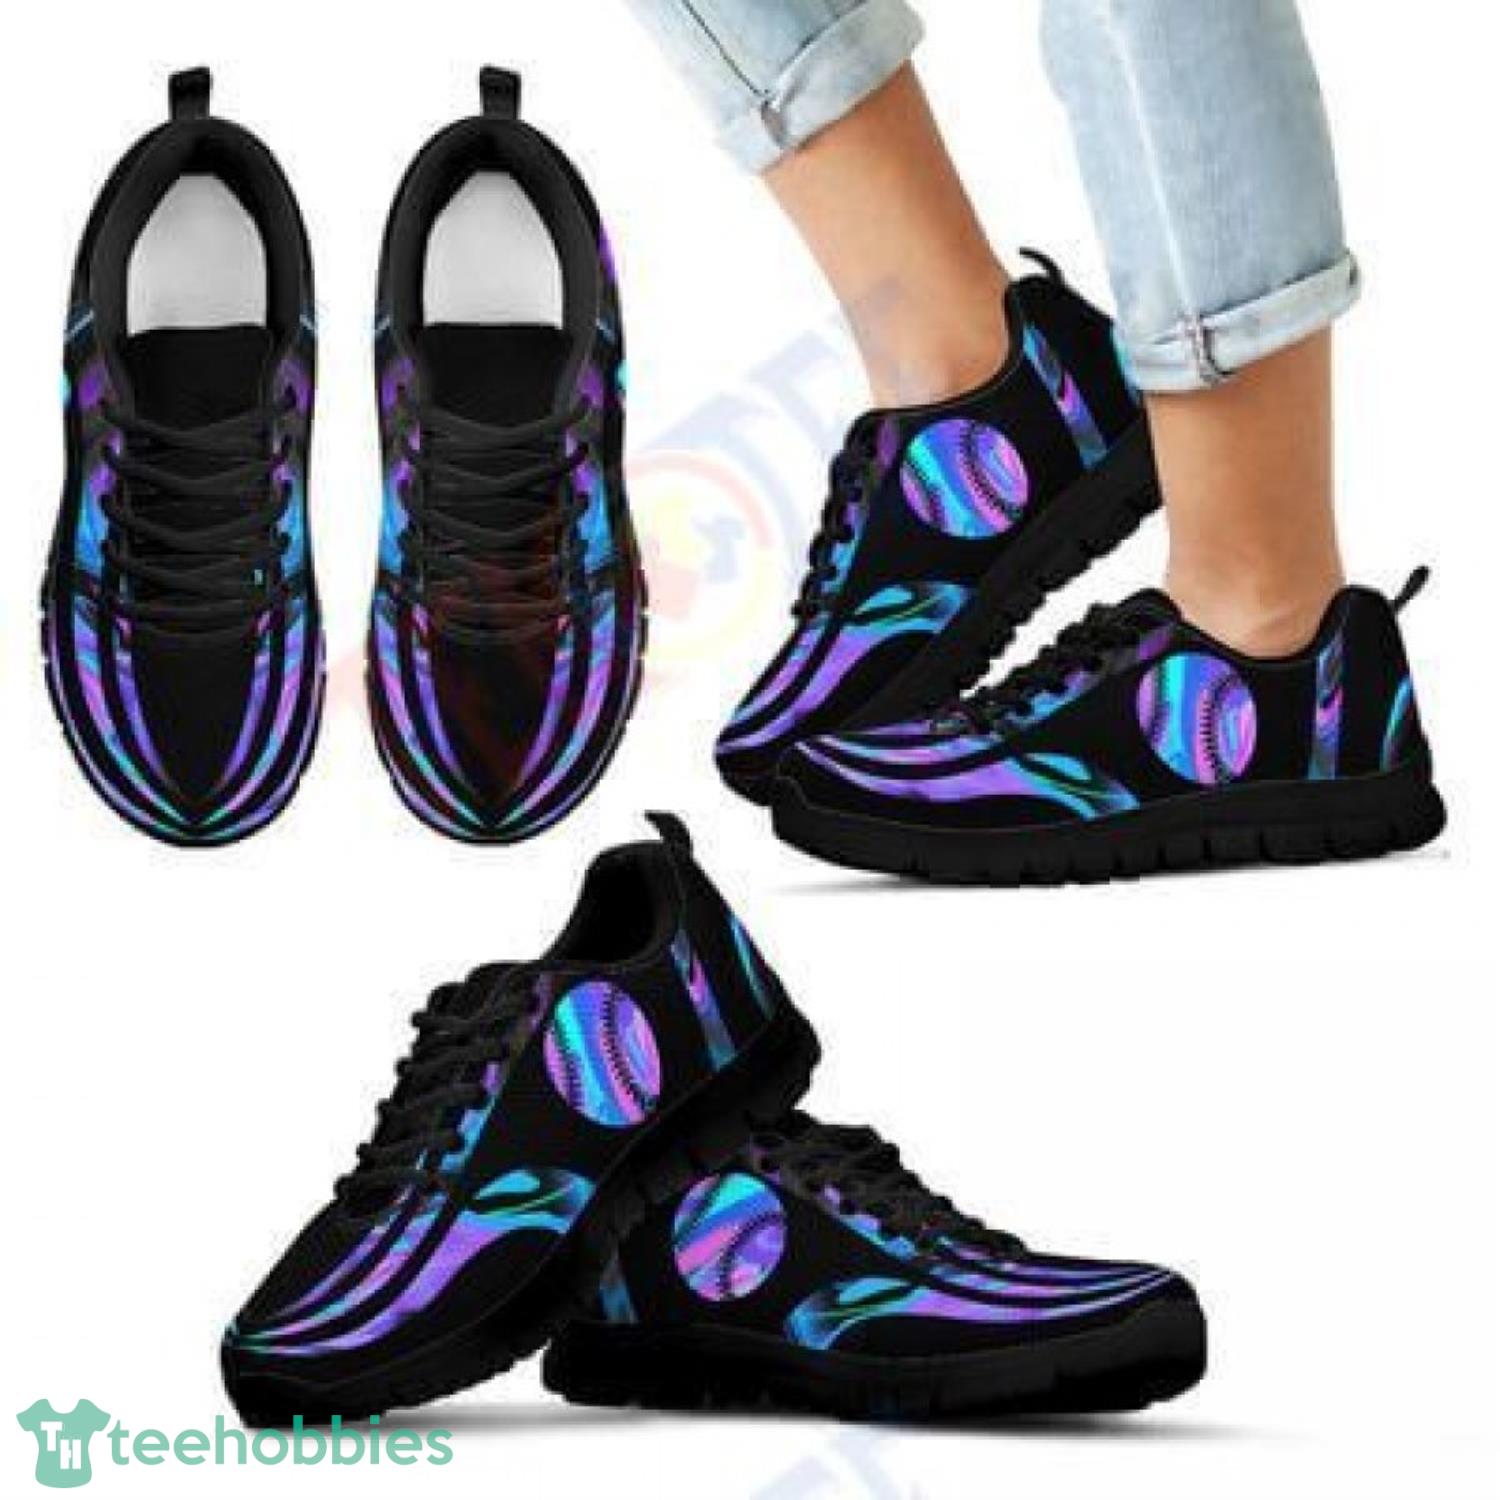 Softball Magical Sneakers Shoes Softball Running Sneaker Shoes Product Photo 1